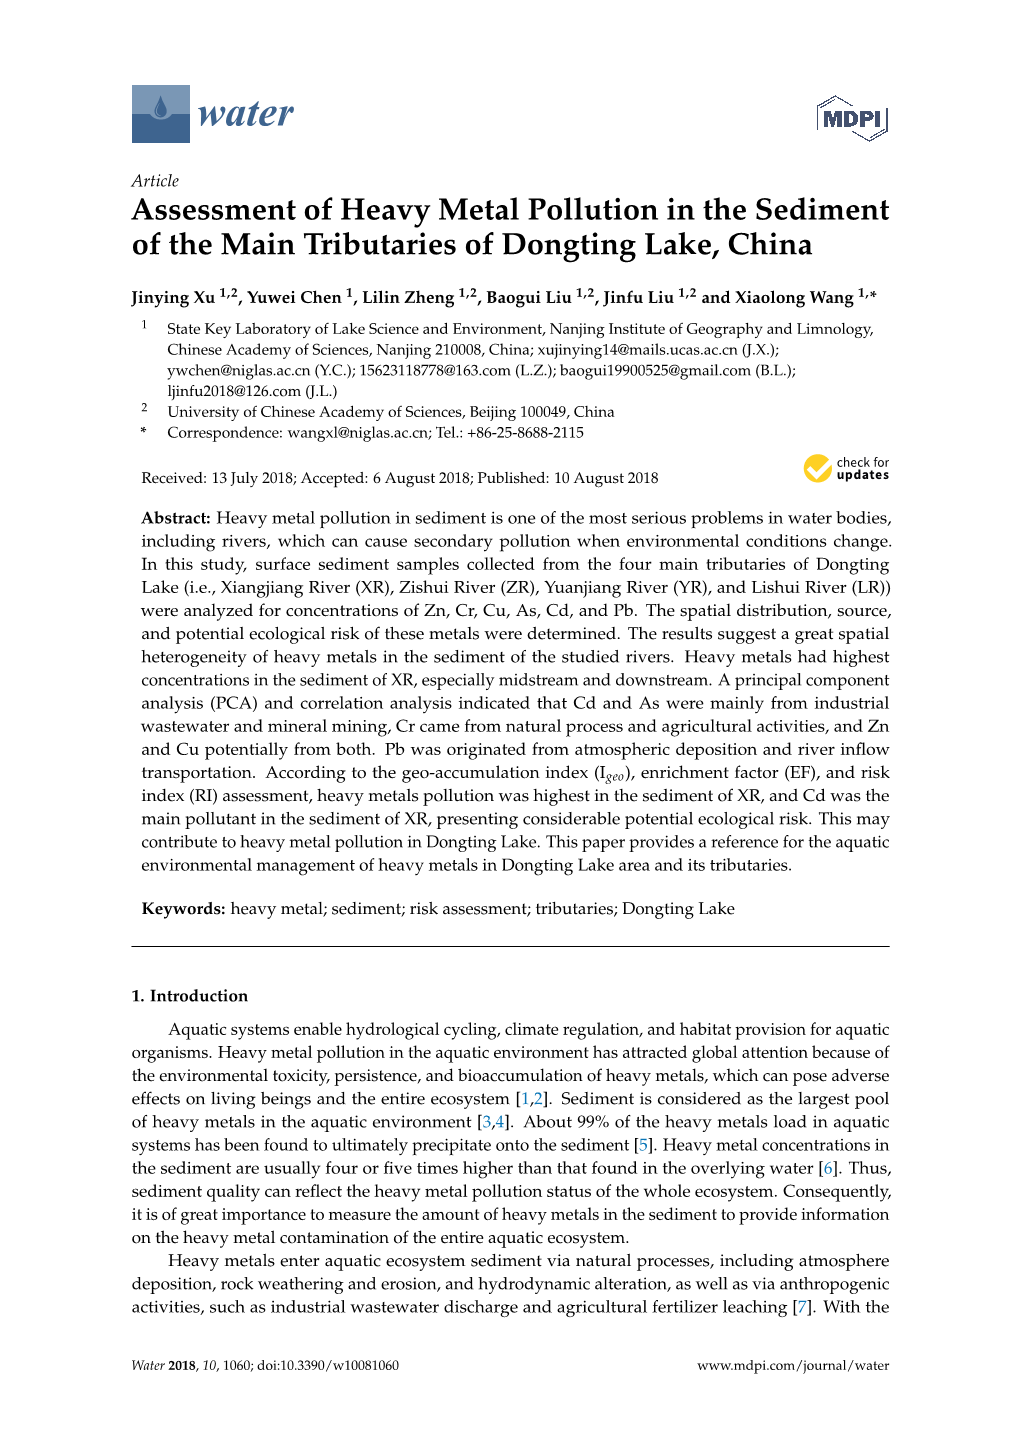 Assessment of Heavy Metal Pollution in the Sediment of the Main Tributaries of Dongting Lake, China